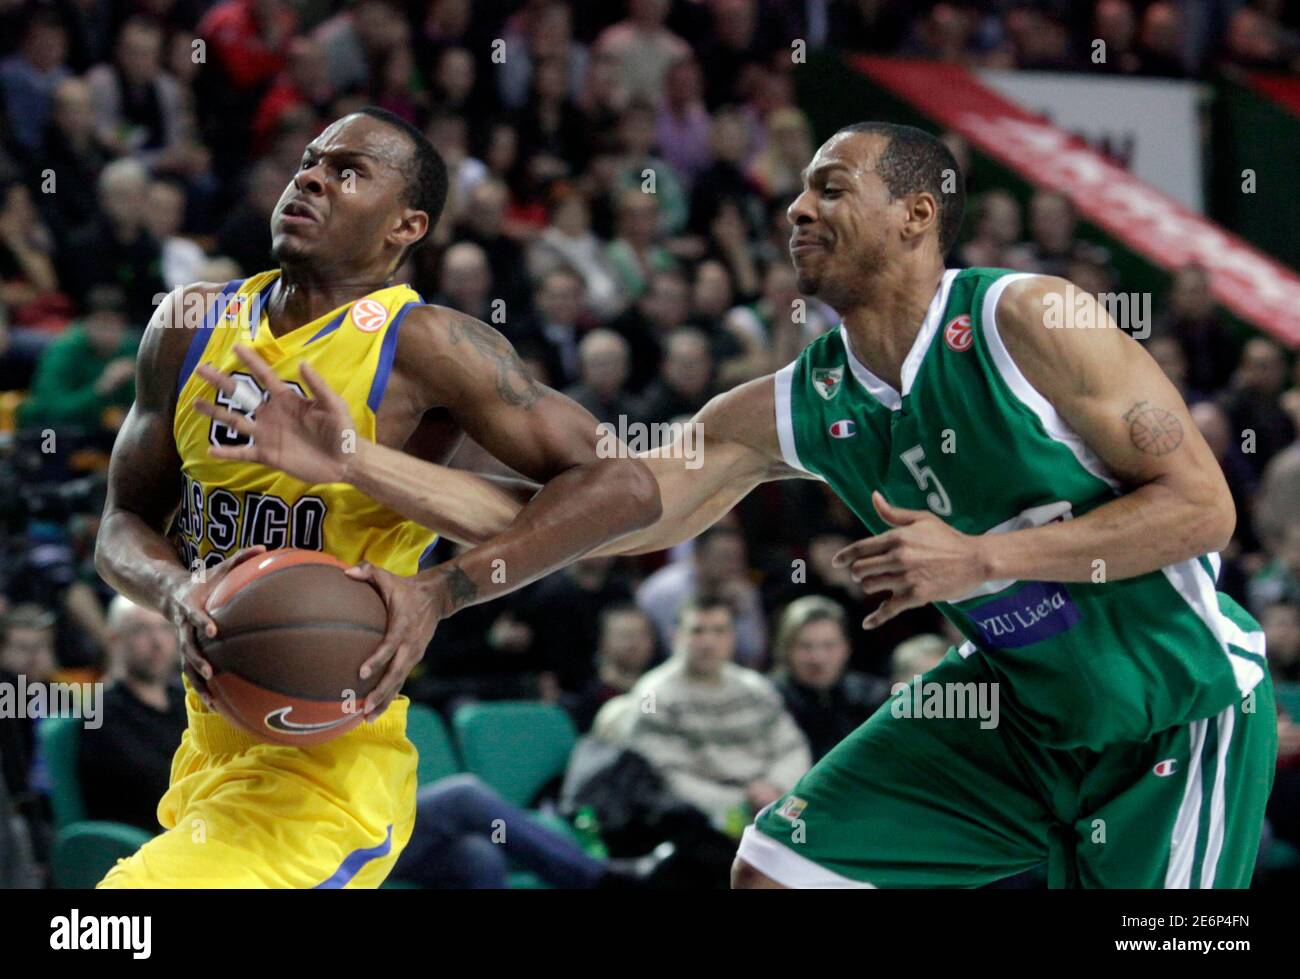 Daniel Ewing (L) of Poland's Asseco Prokom fights for the ball with Marcus  Brown of Lithuania's Zalgiris during their men's Euroleague basketball game  in Kaunas March 3, 2010. REUTERS/Ints Kalnins (LITHUANIA -